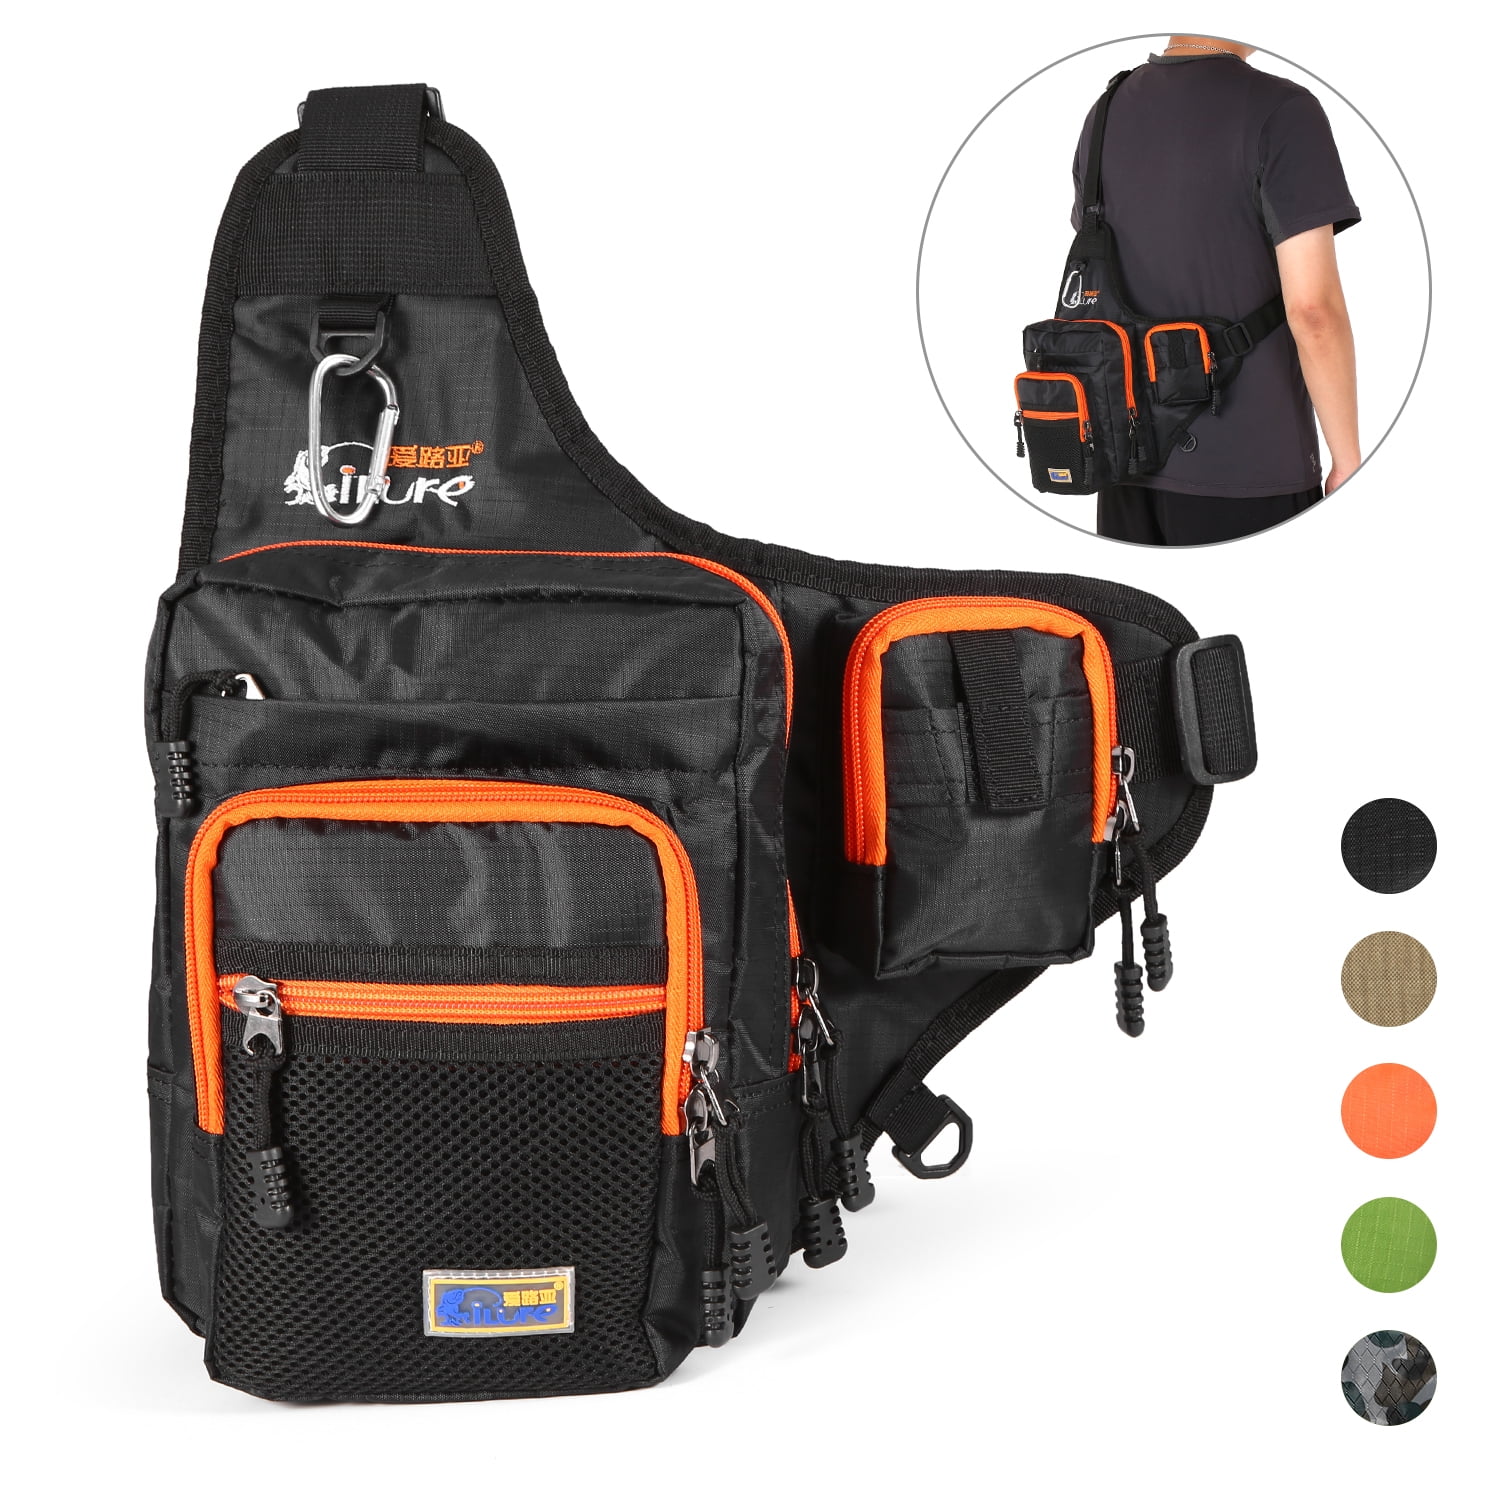 THE BEST DAY Black Cylindrical Large Capacity Fishing Tackle Backpack Outdoor Shoulders Bag 